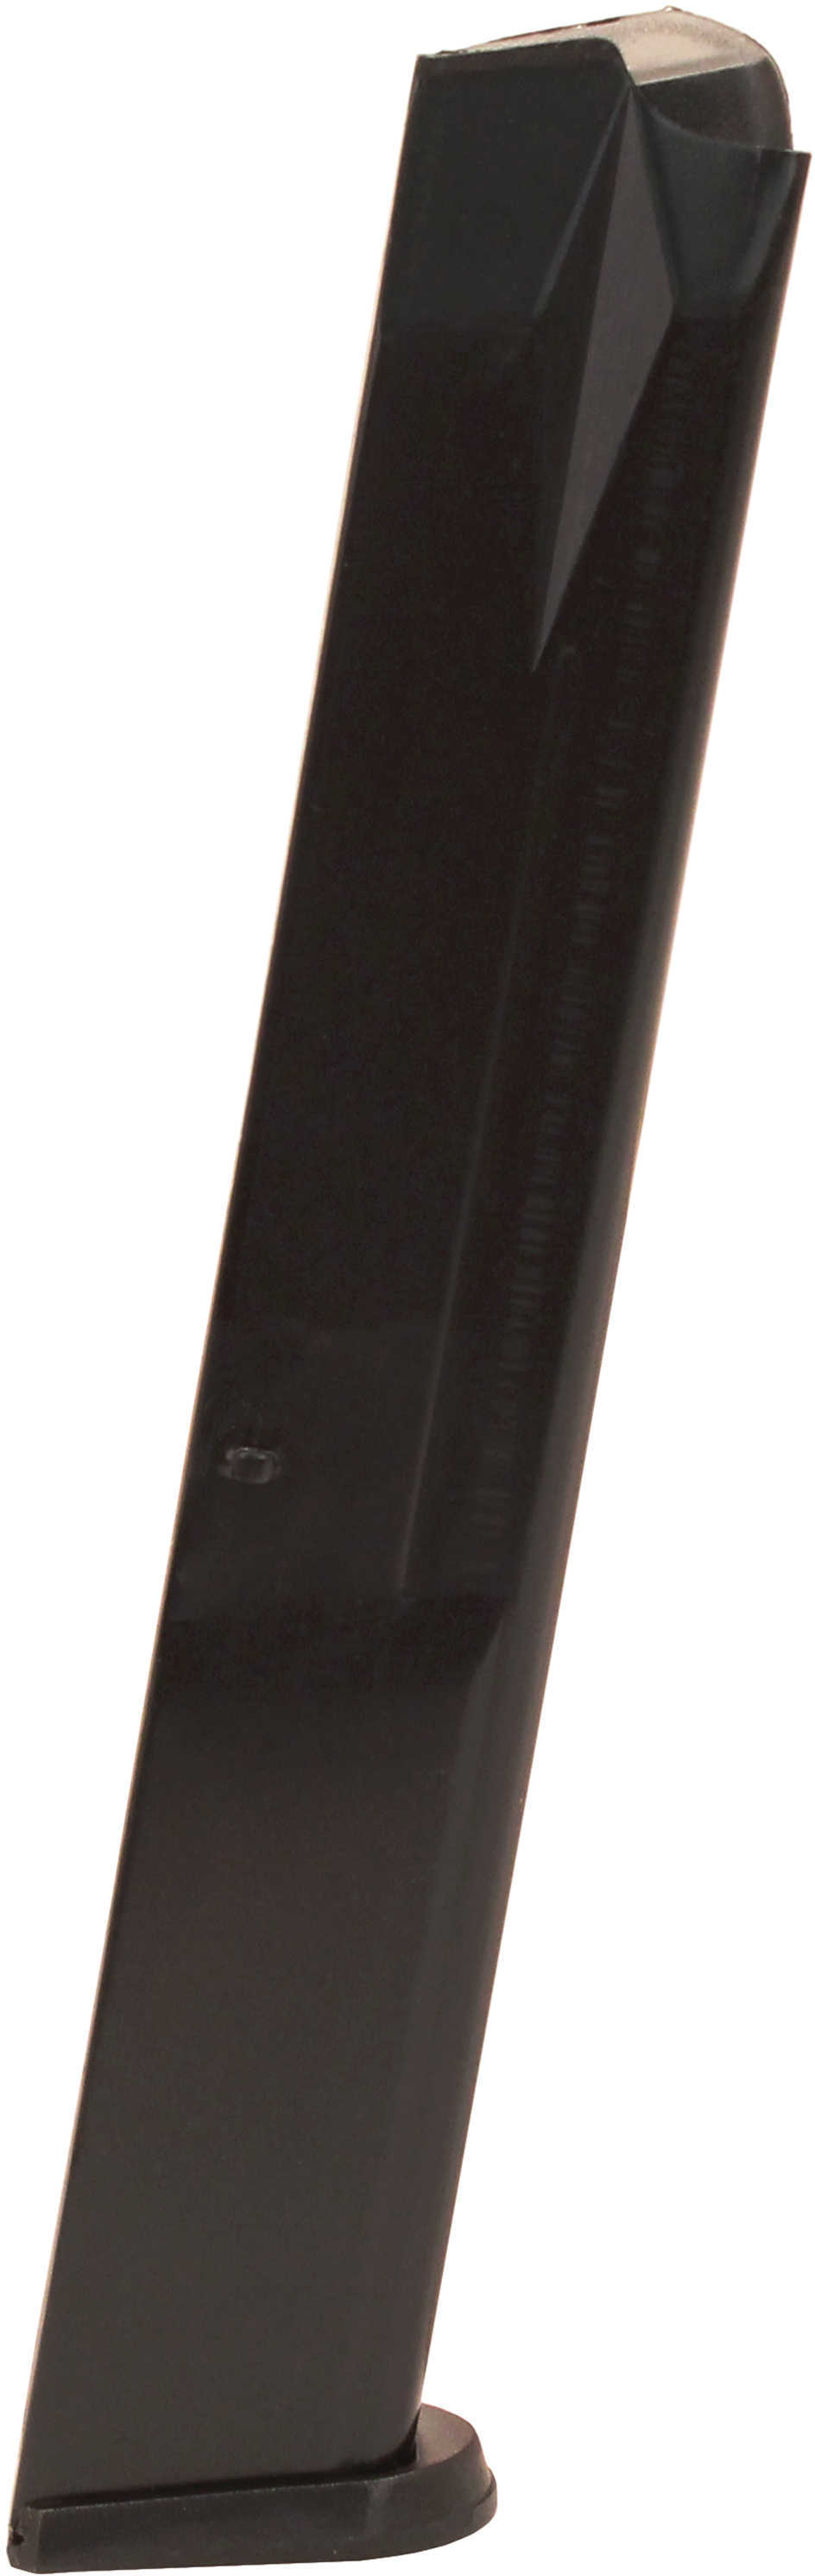 Promag Springfield XD-40 High Capacity Magazine .40 S&W - 20 Round Blue Easy Loading Rugged Carbon Heat-treate